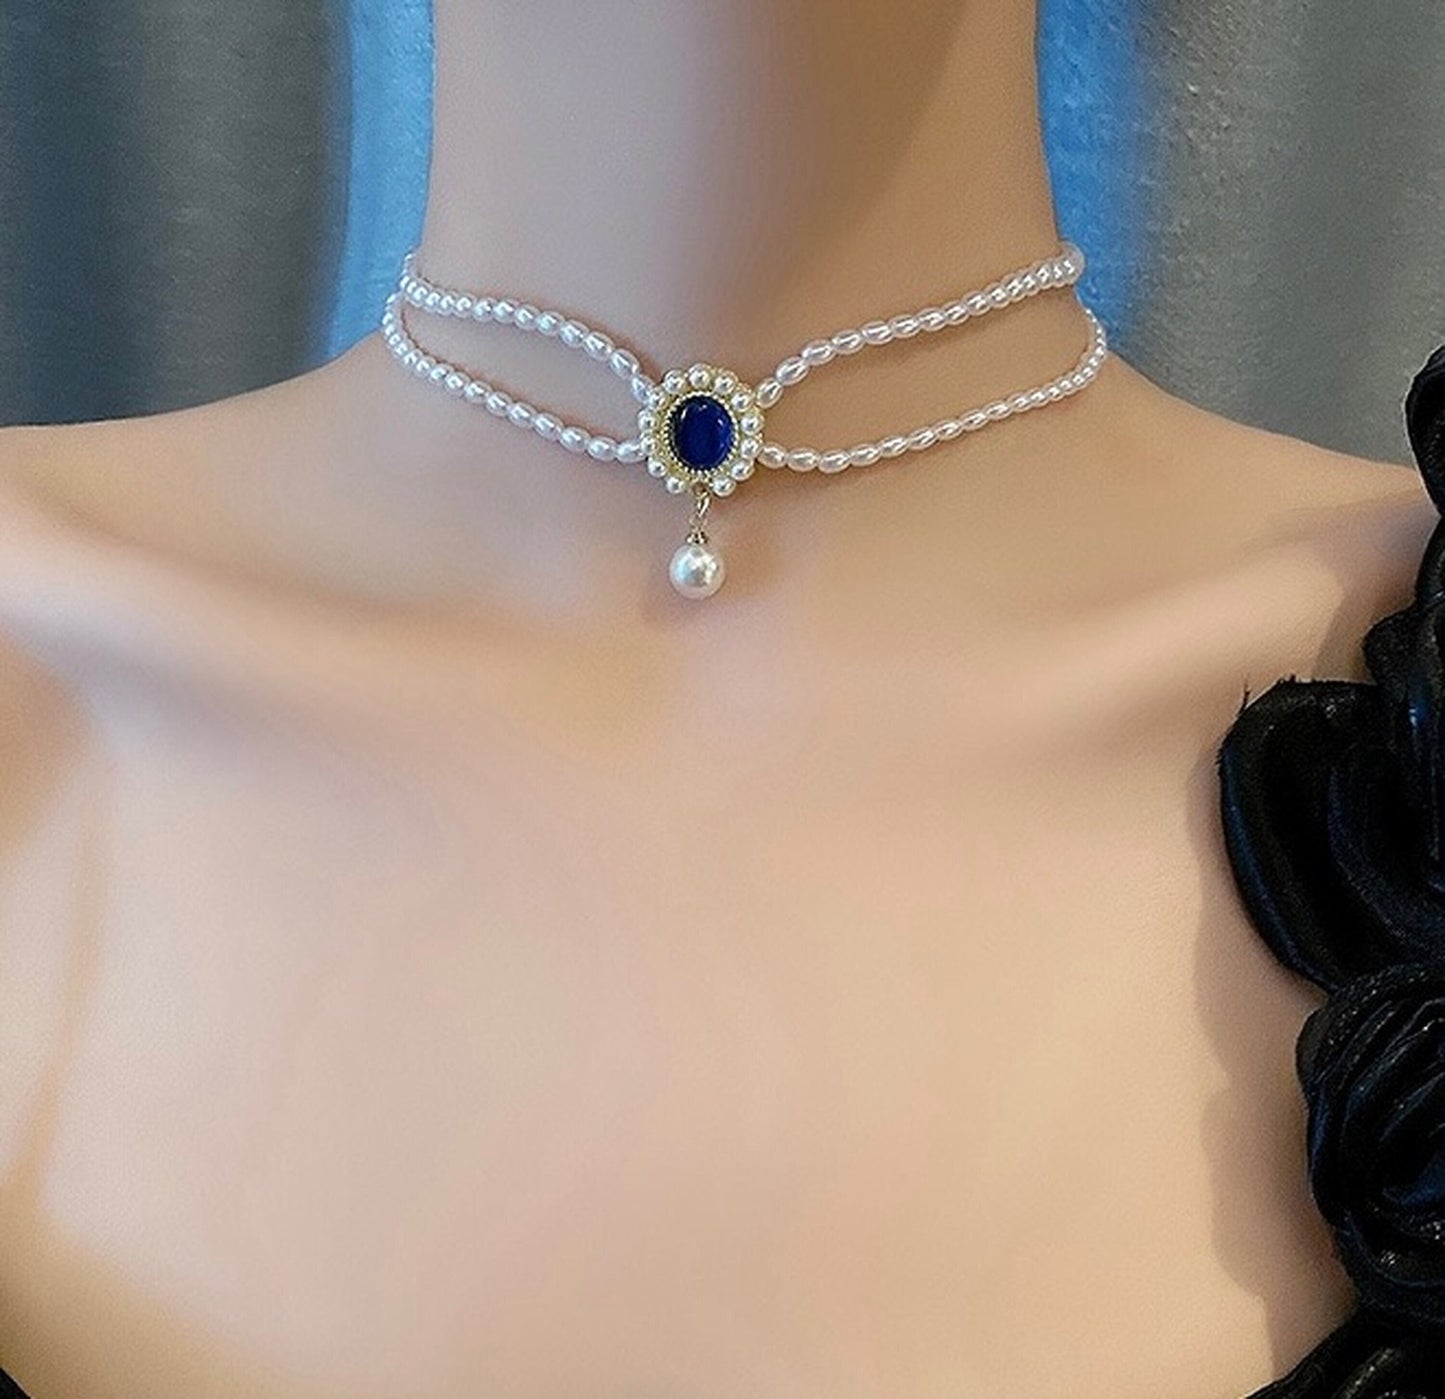 Vintage Style Double Layer Necklace, Blue Pendnat Necklace, Double Layer Pearl Bead Choker, Gothic Choker, Gatsby Party Jewelry, Handmade